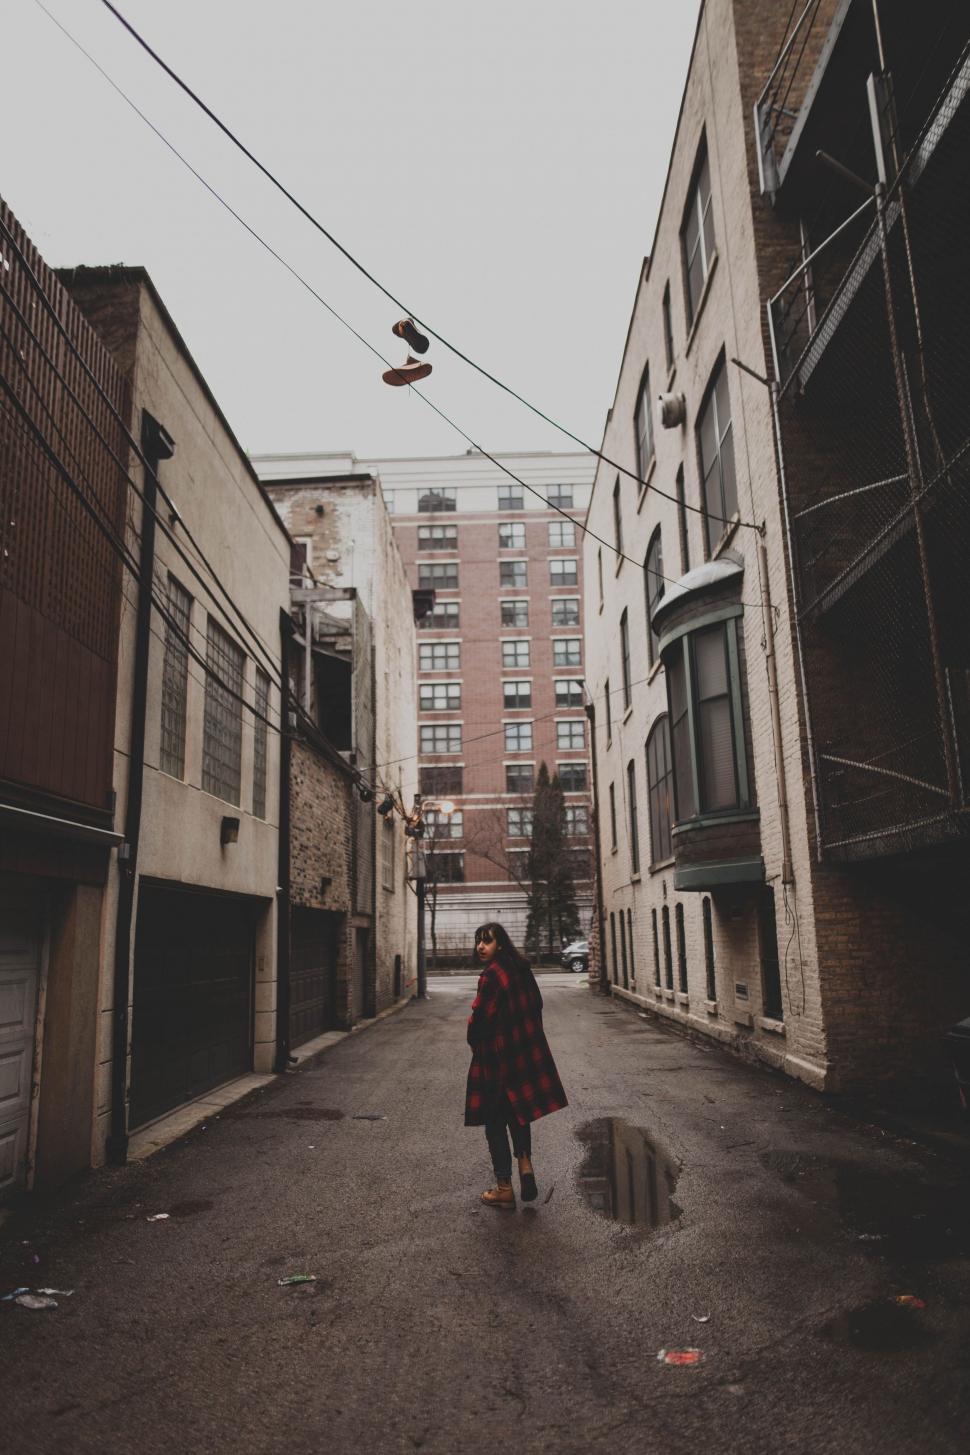 Free Image of Woman Walking Down a City Street Next to Tall Buildings 